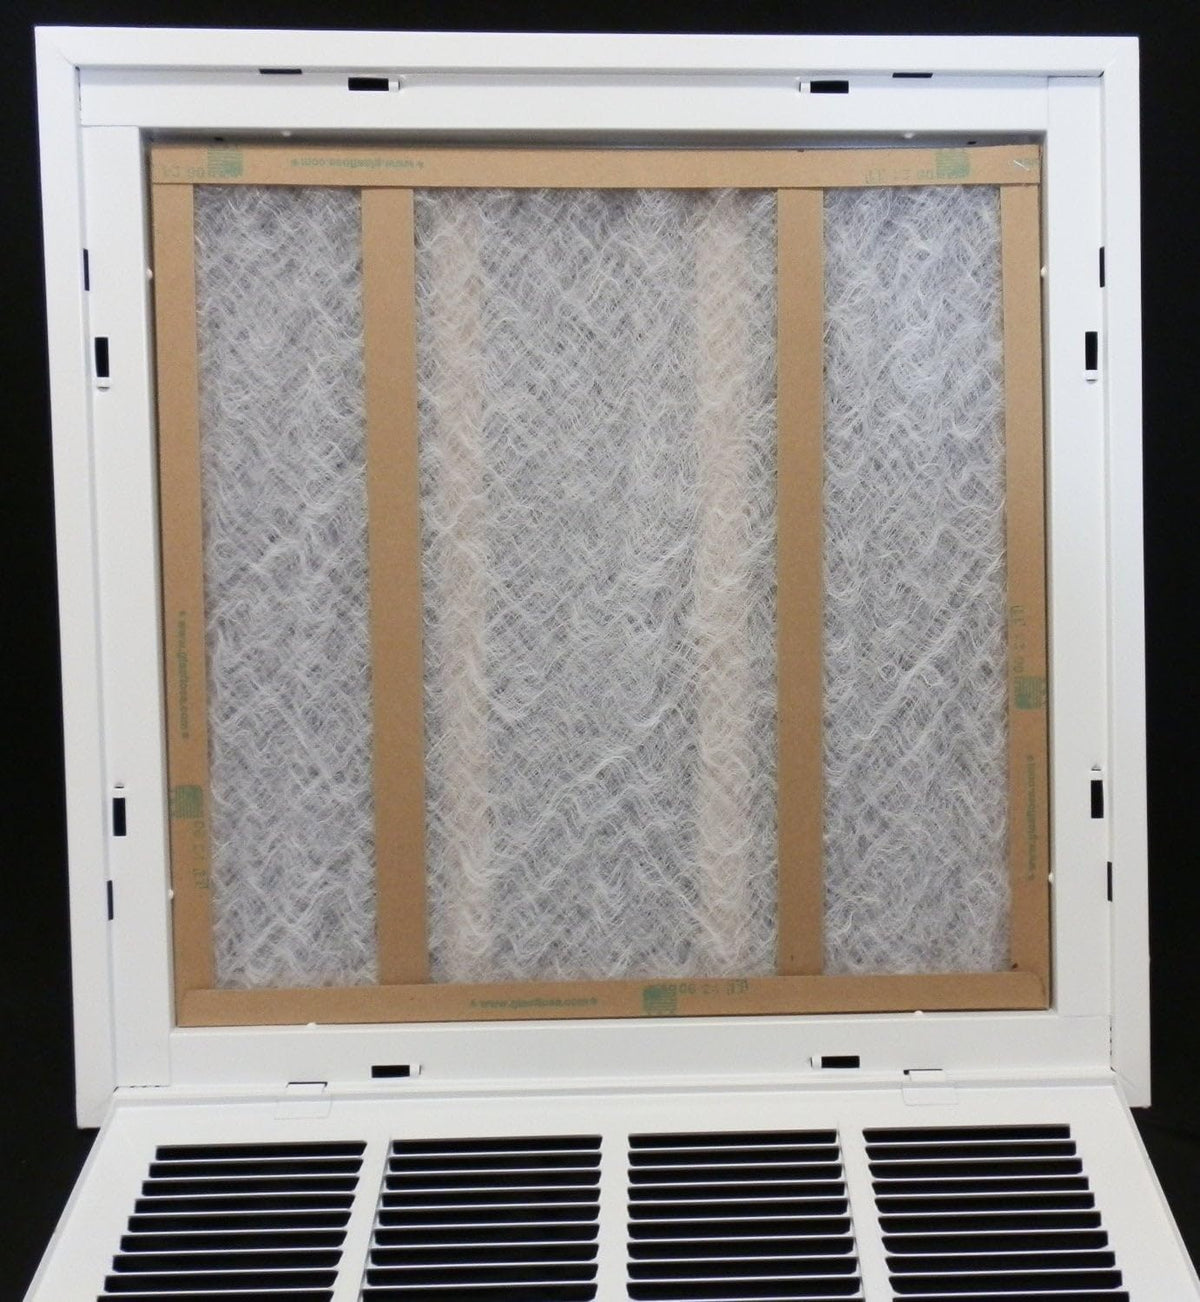 28&quot; X 12&quot; Steel Return Air Filter Grille for 1&quot; Filter - Removable Frame - [Outer Dimensions: 30 5/8&quot; X 14 5/8&quot;]